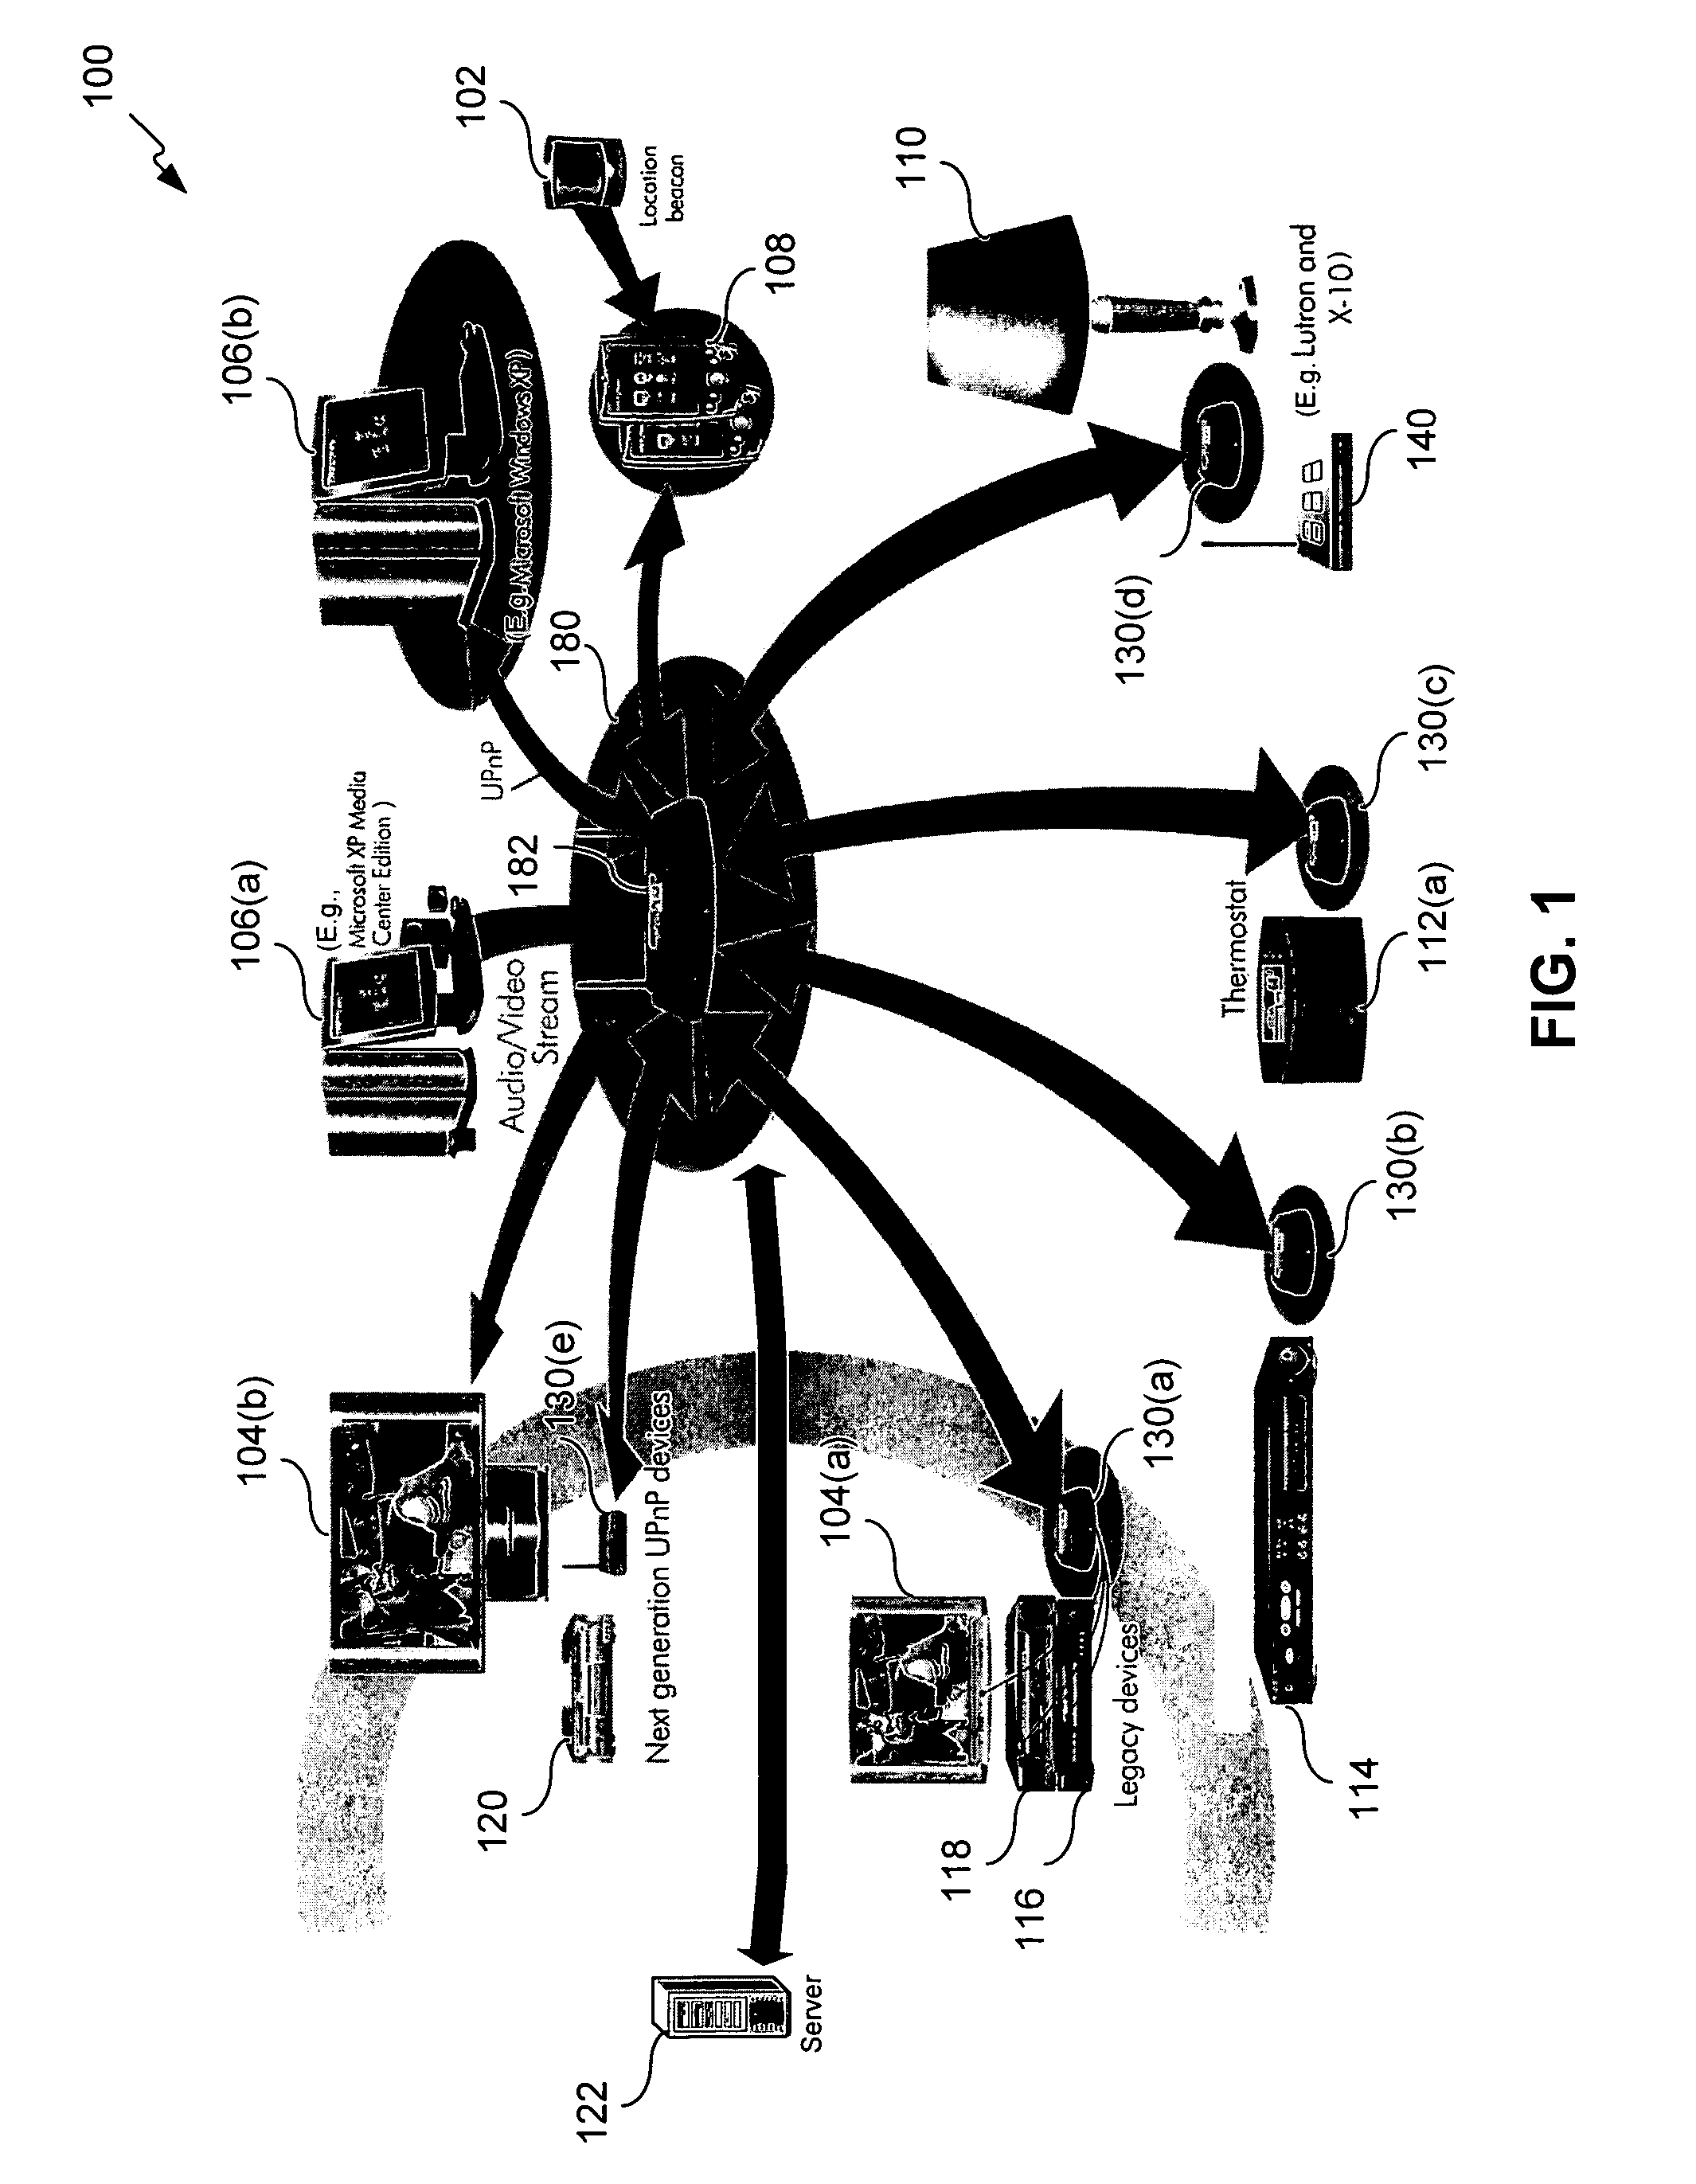 Method, system, and computer program product for automatically managing components within a controlled environment